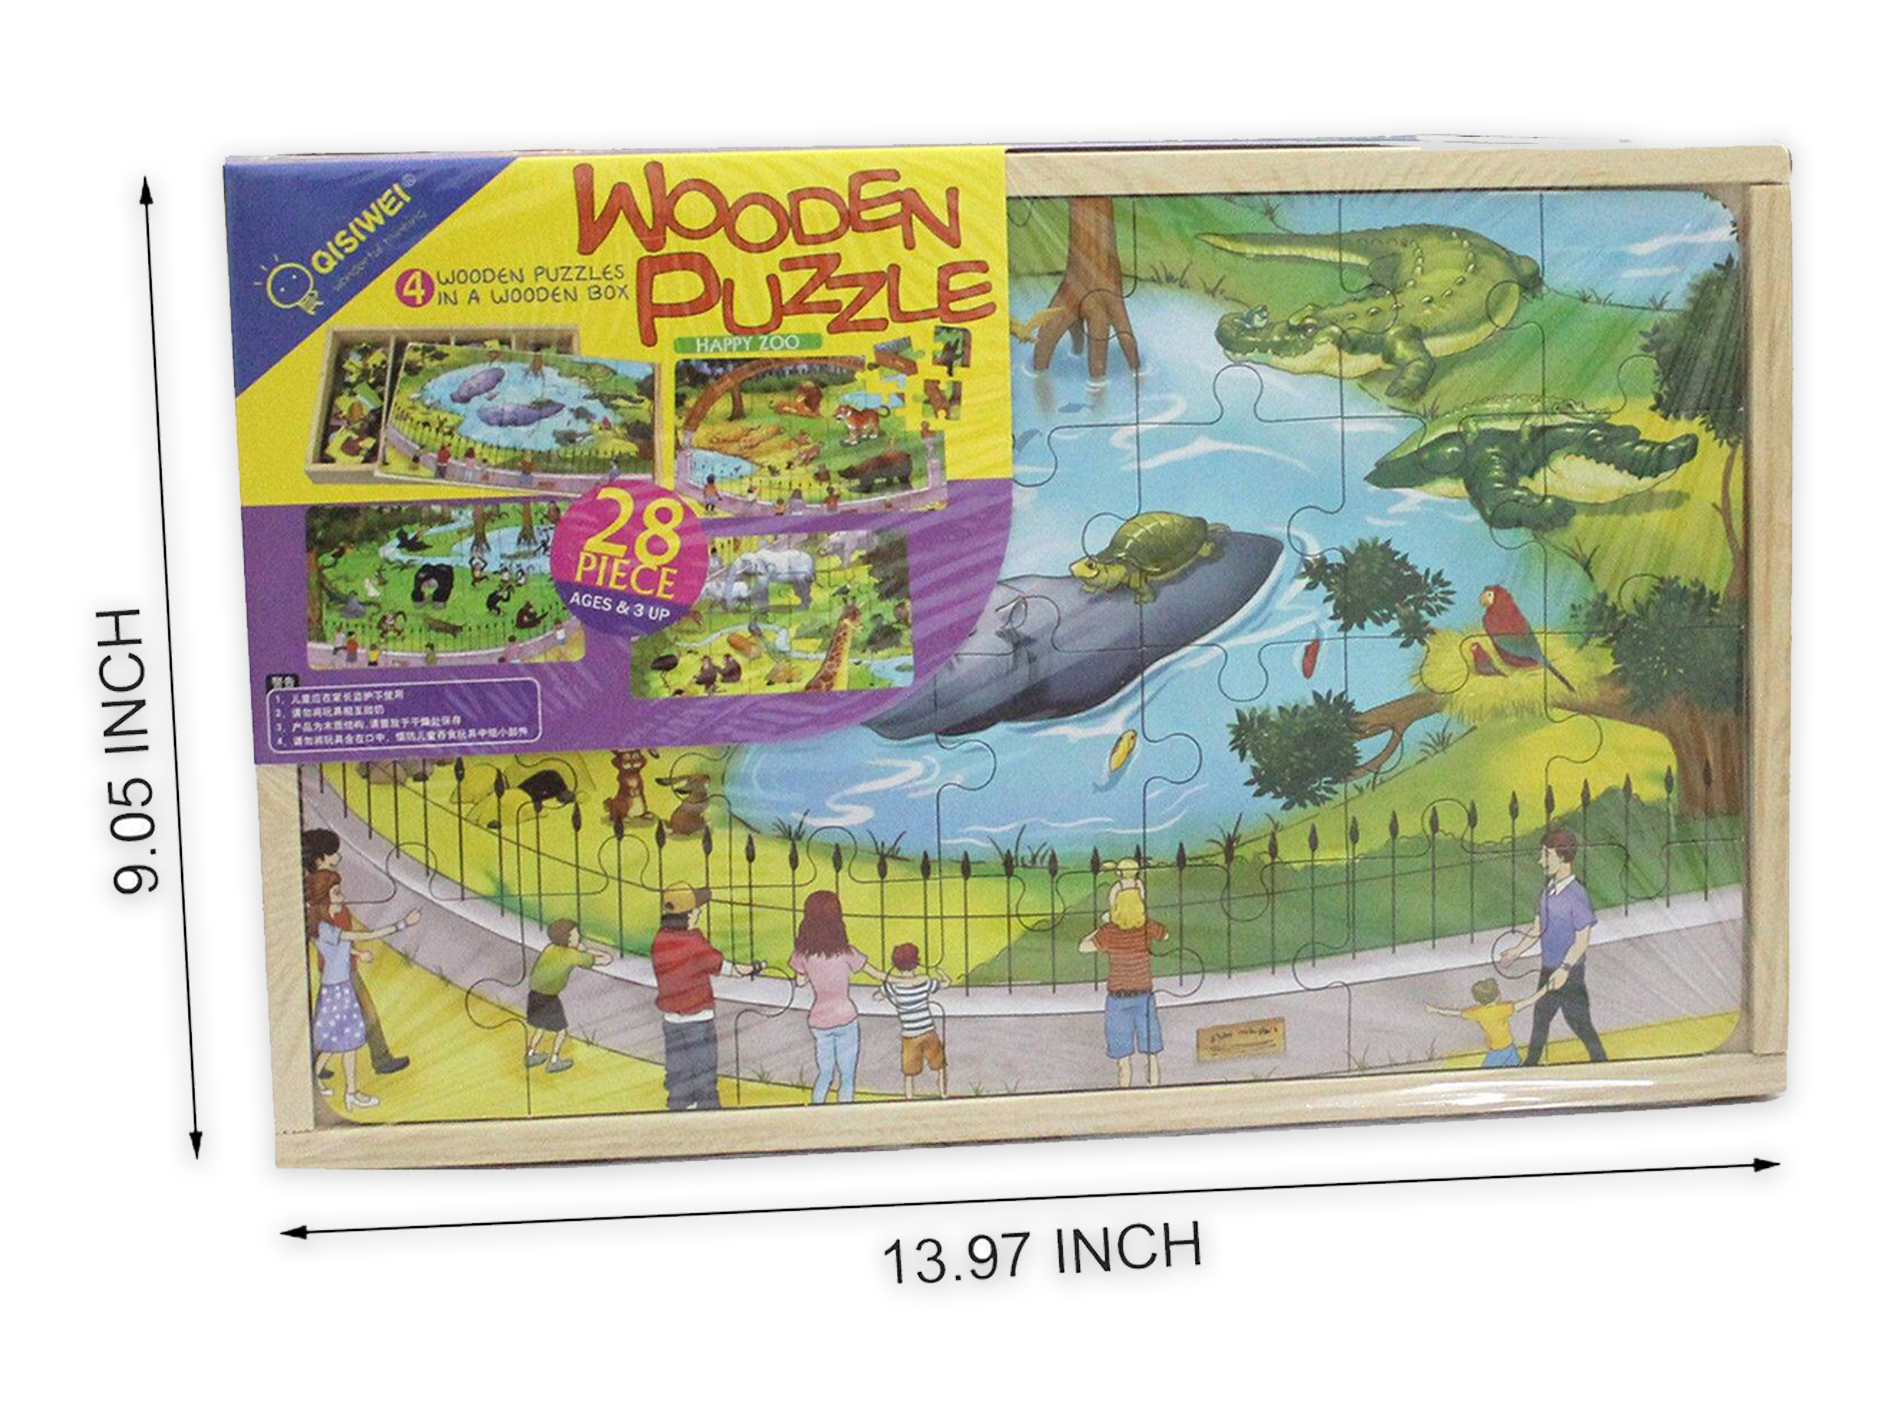 4-in-1 Wooden Puzzles in a wooden box - 28 piece each - size 13.97 inch x 9.05 inch